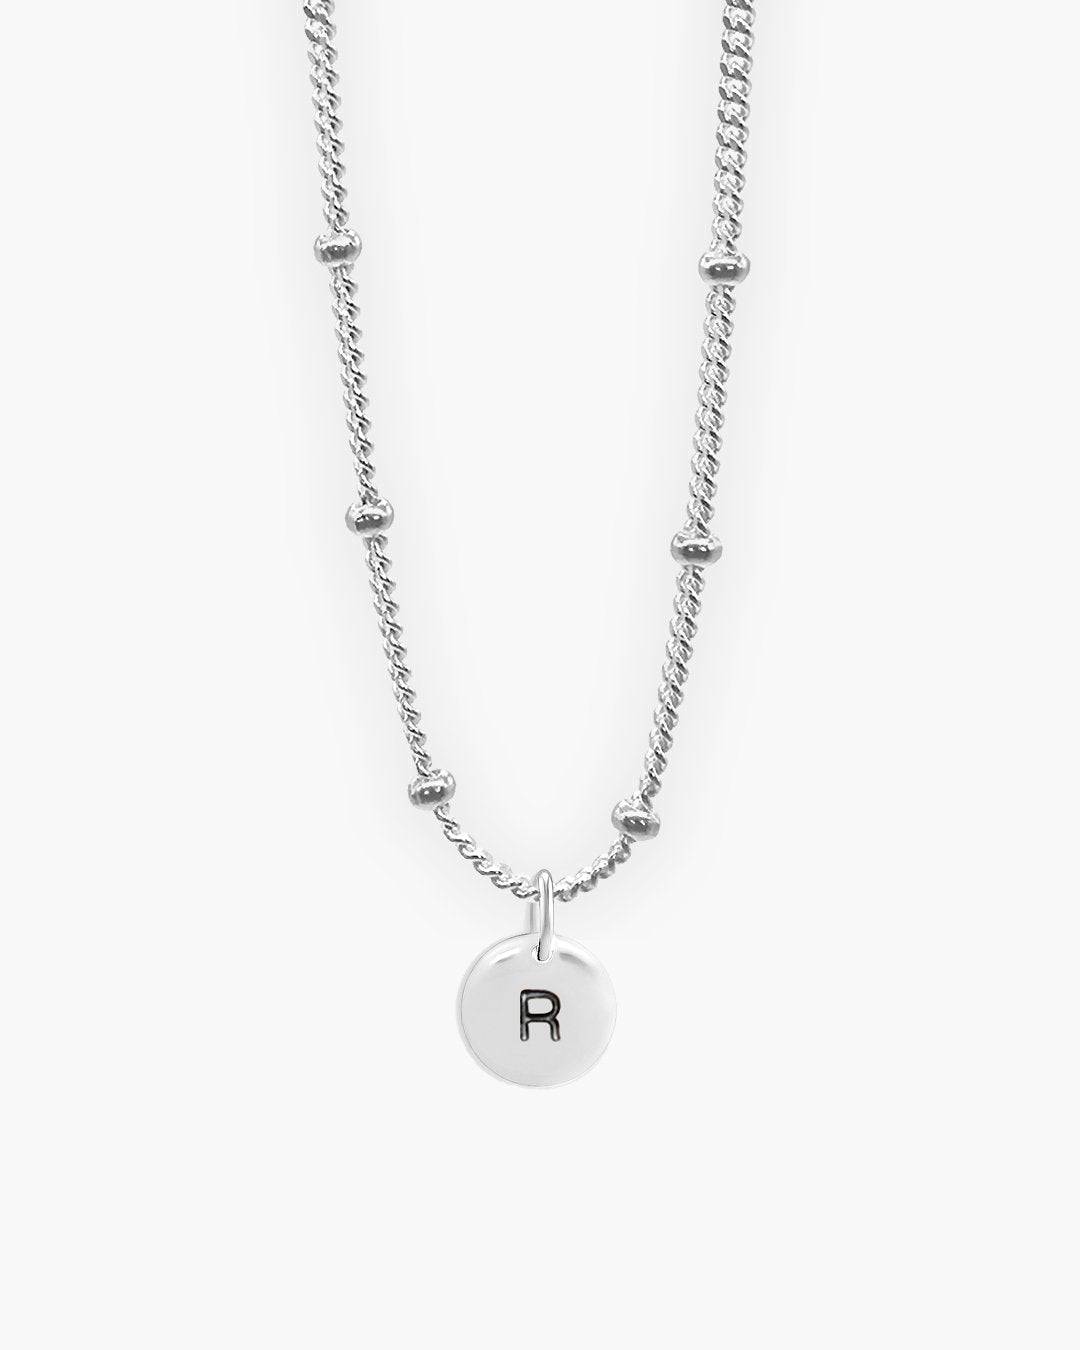 Silver Round Love Letter R Necklace